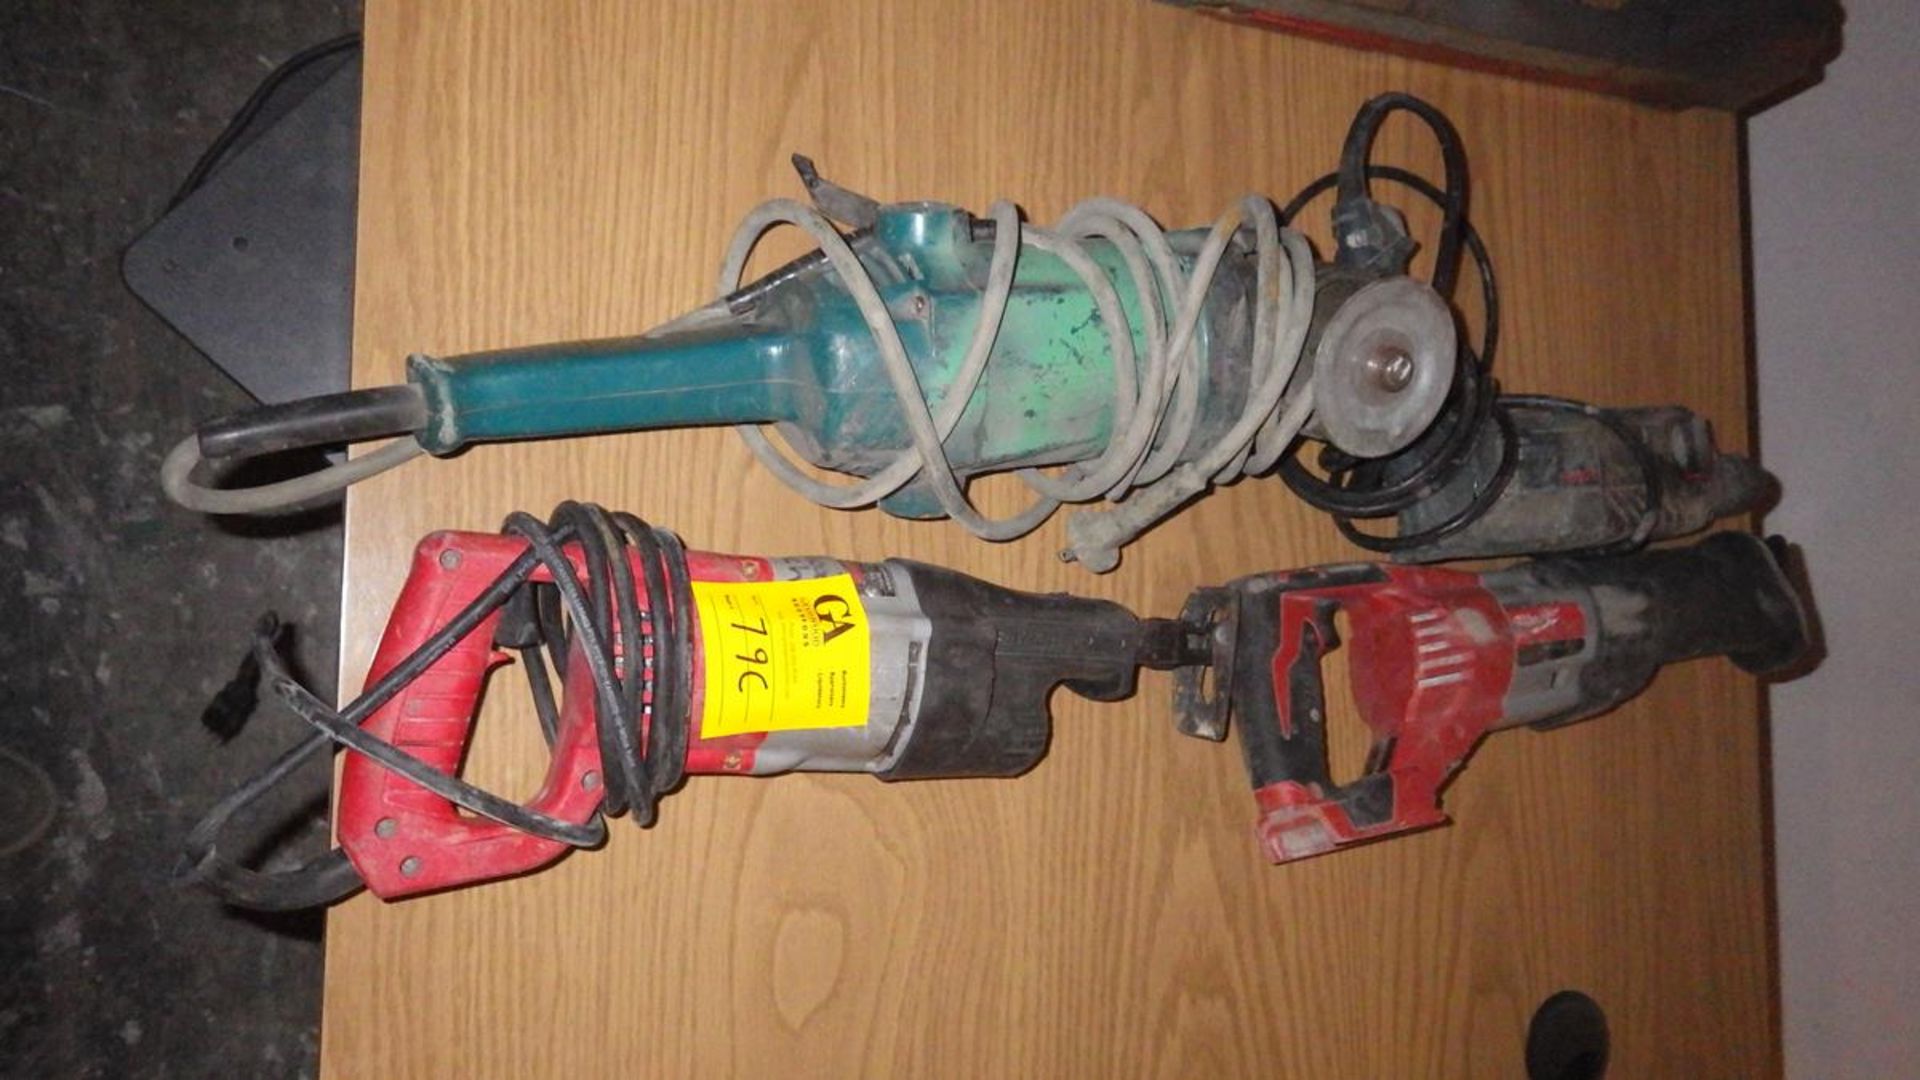 Two Milwaukee reciprocating saws one bosch hammer drill and one angle grinder